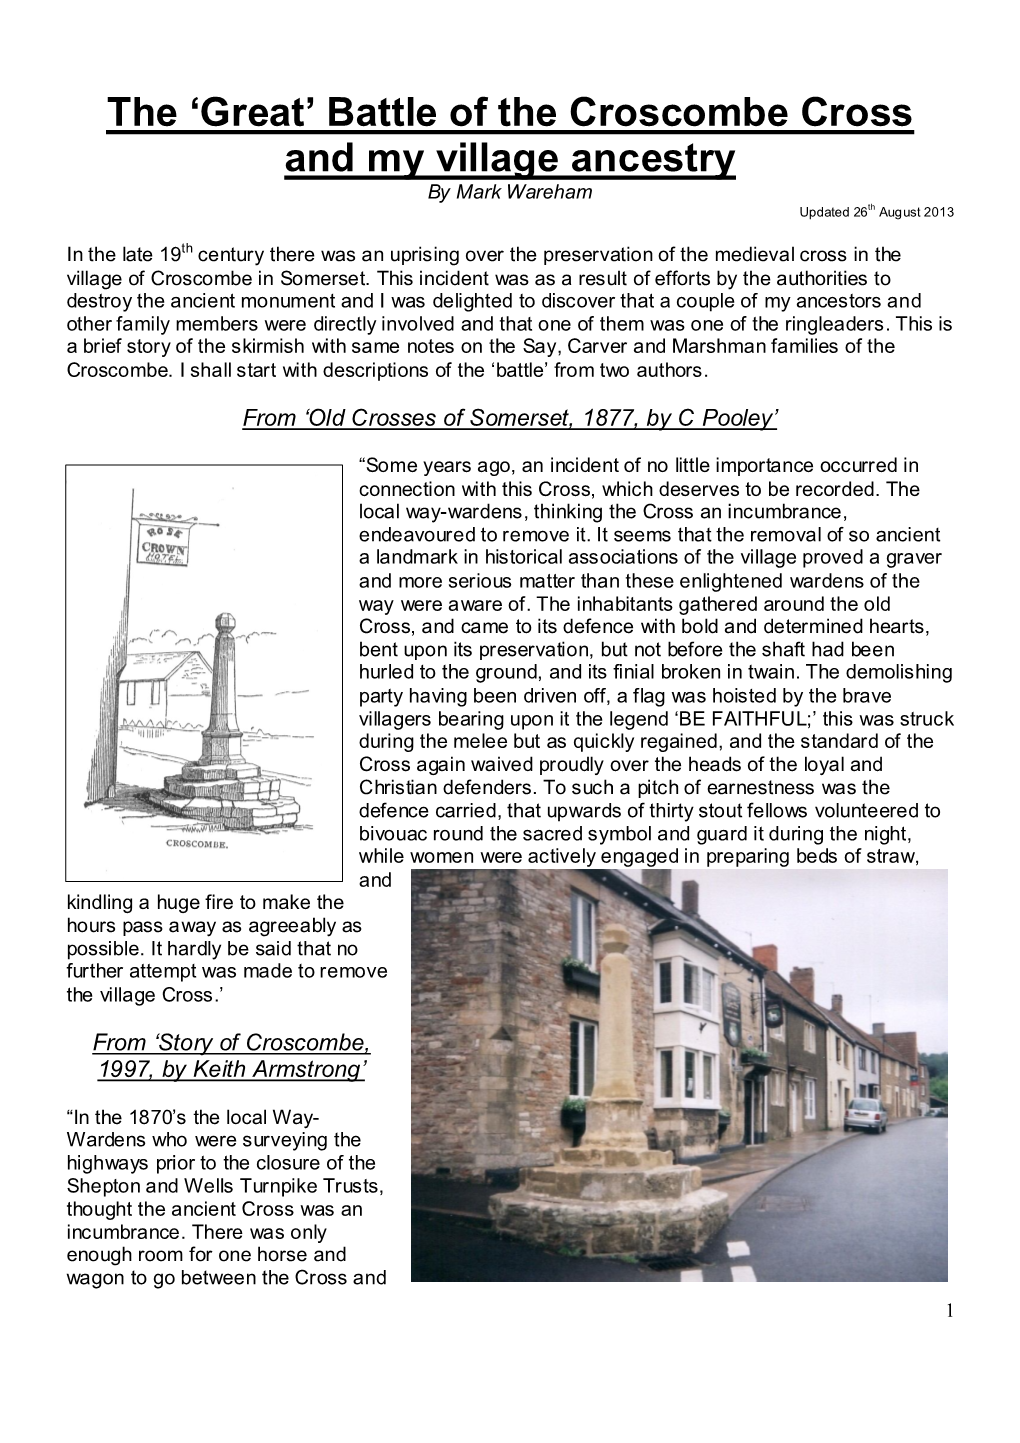 The 'Great' Battle of the Croscombe Cross and My Village Ancestry